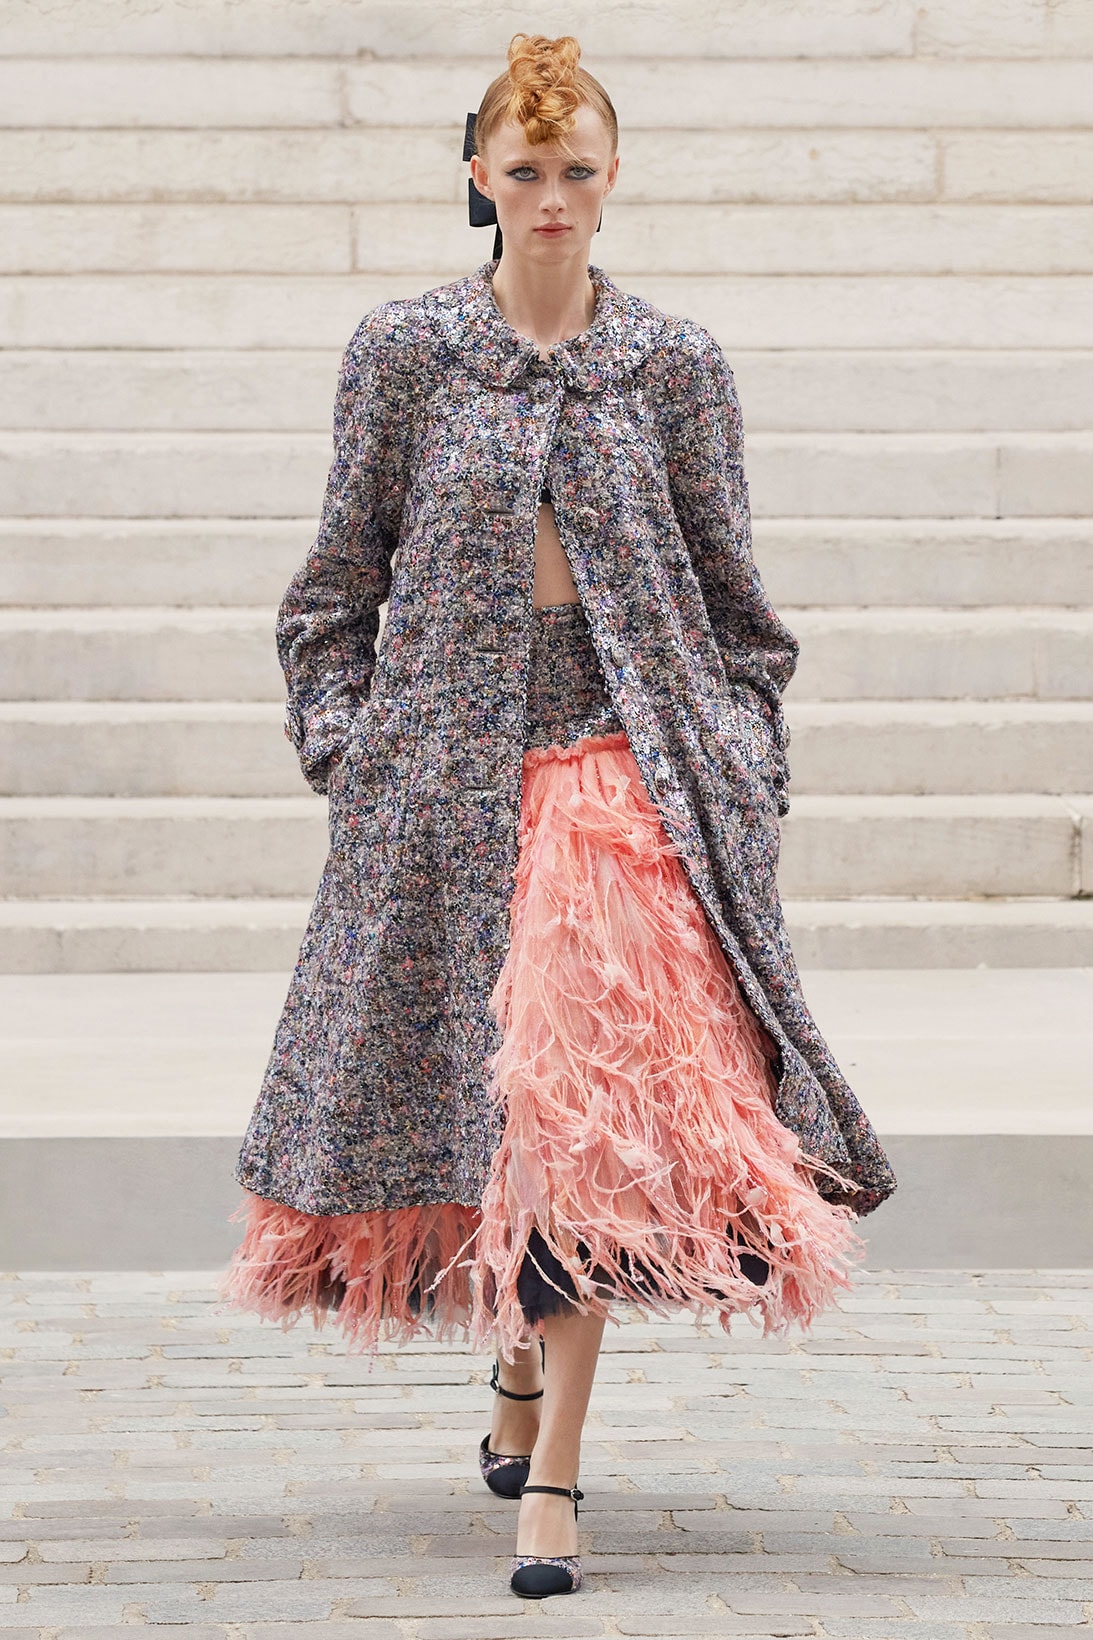 Chanel FW22 couture #21 - Tagwalk: The Fashion Search Engine